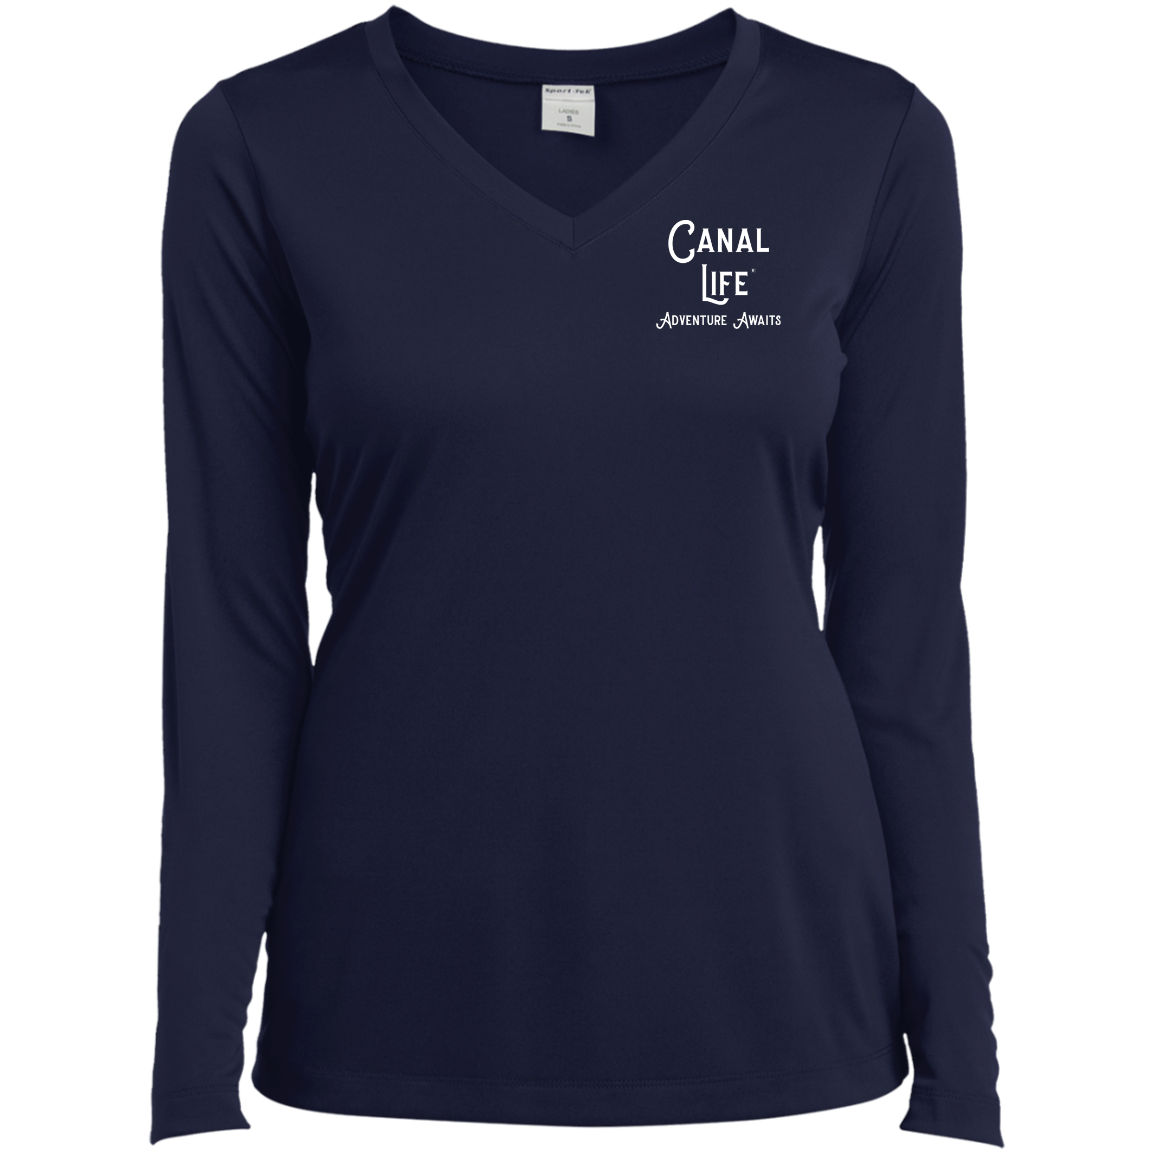 Canal Life Adventure Awaits White Letter Ladies’ Long Sleeve Performance V-Neck Tee